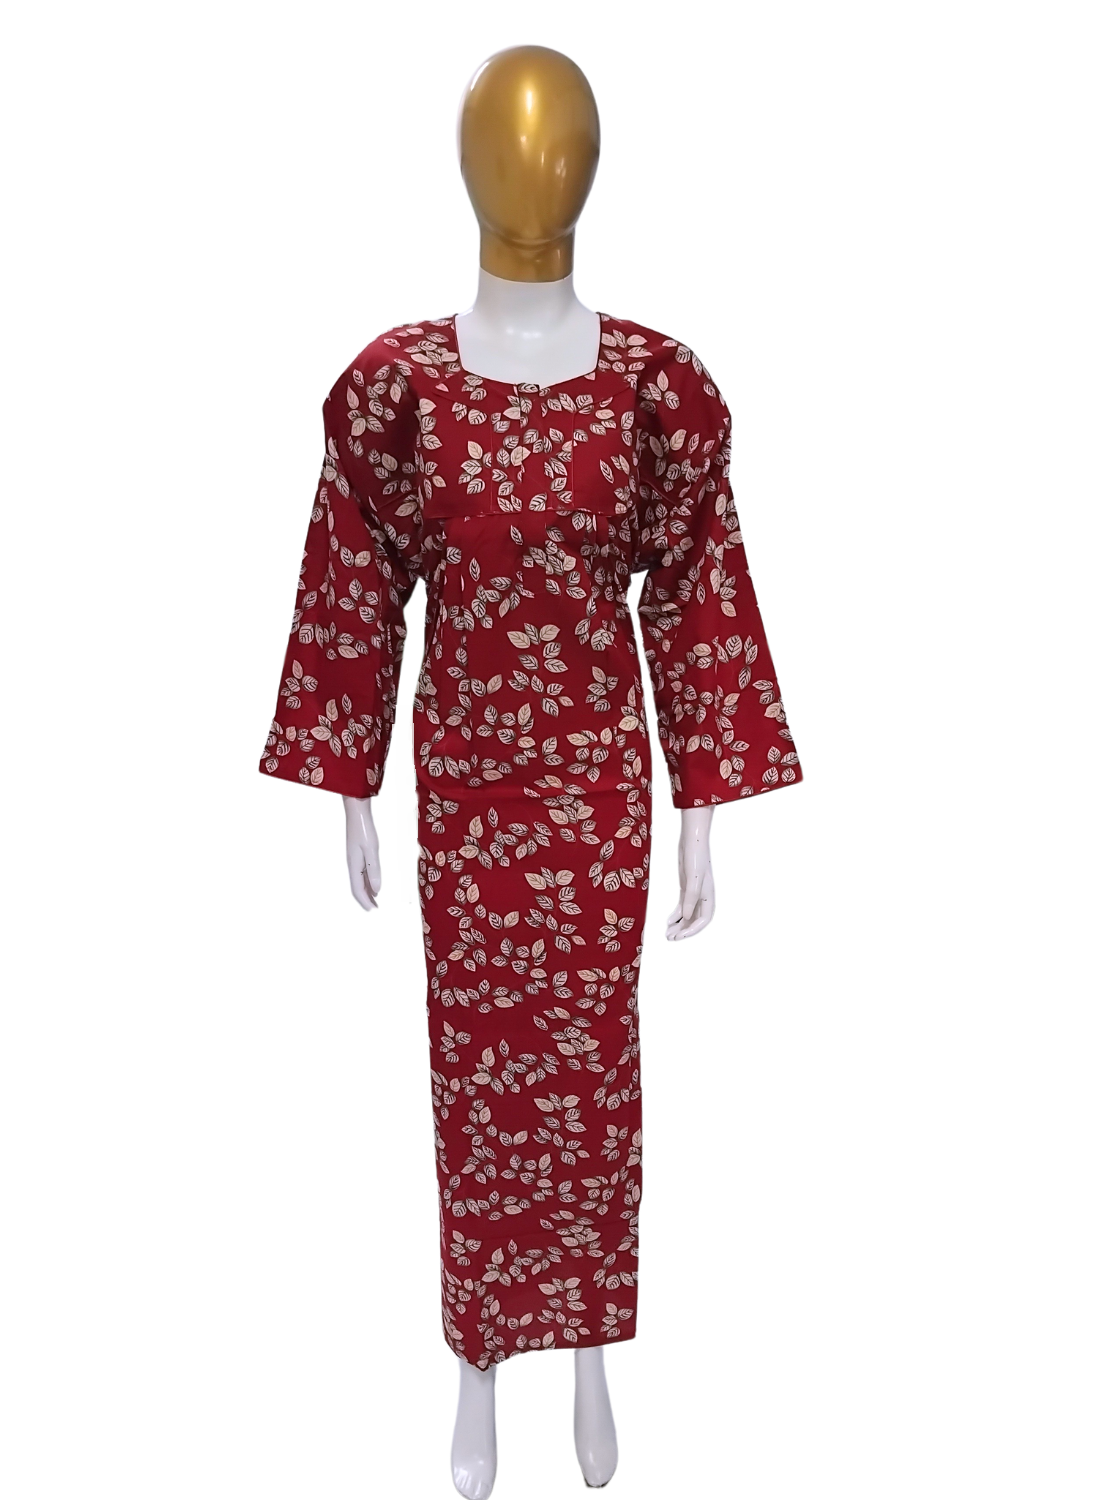 MANGAI Premium Cotton Printed Regular Comfort Long Sleeve Model 3XL Size Nighties - Fancy Neck | With Side Pocket |Shrinkage Free Nighties | Trendy Collection's for Stylish Women's